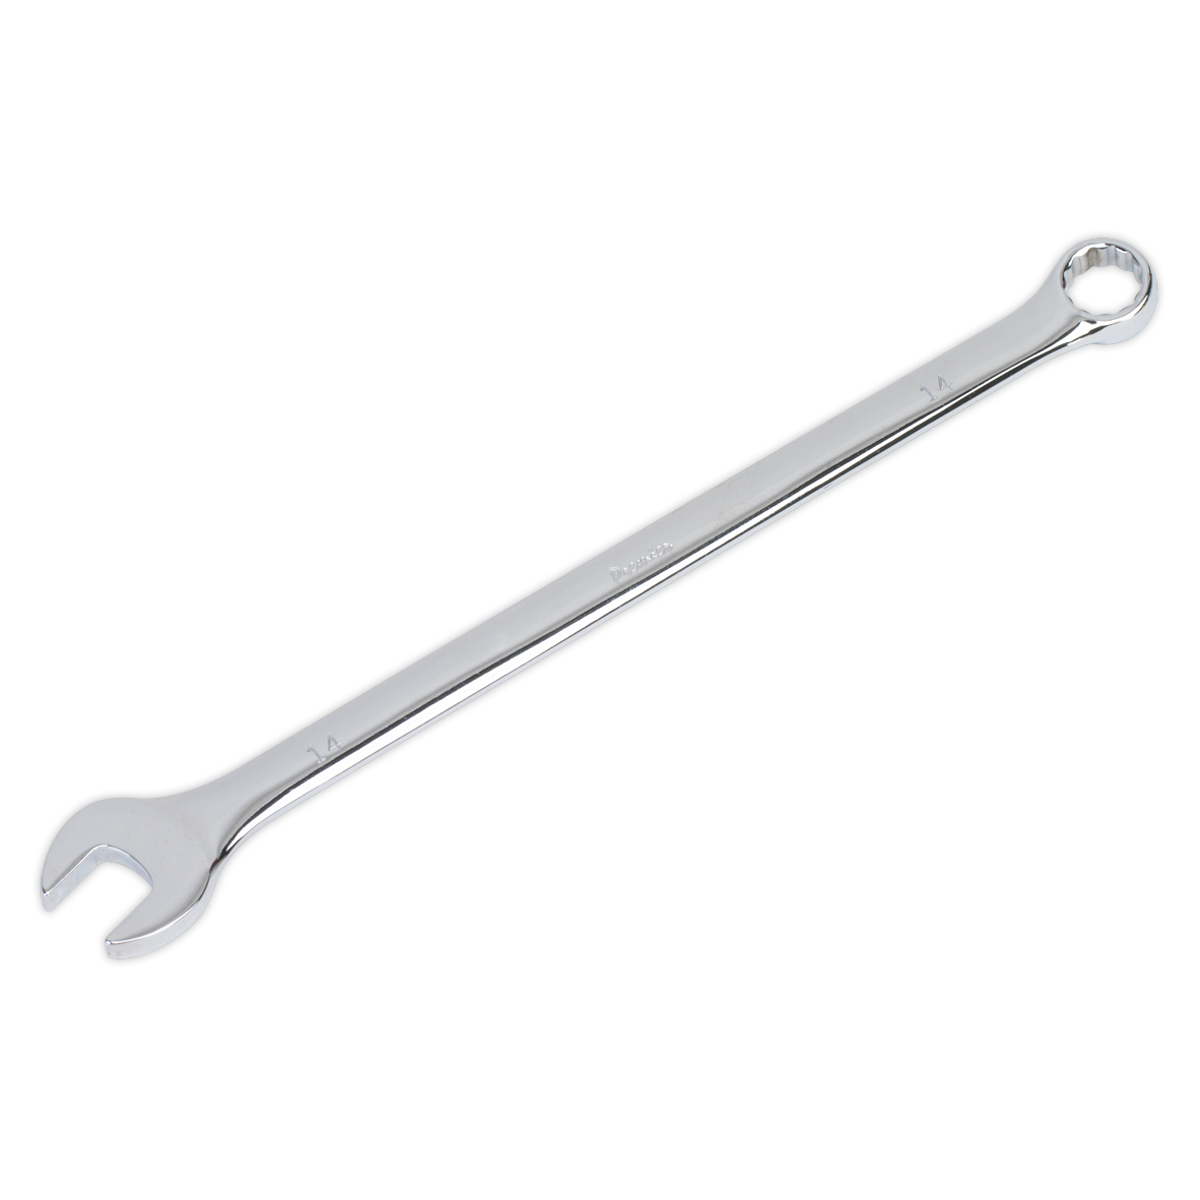 SEALEY - AK631014 Combination Spanner Extra-Long 14mm